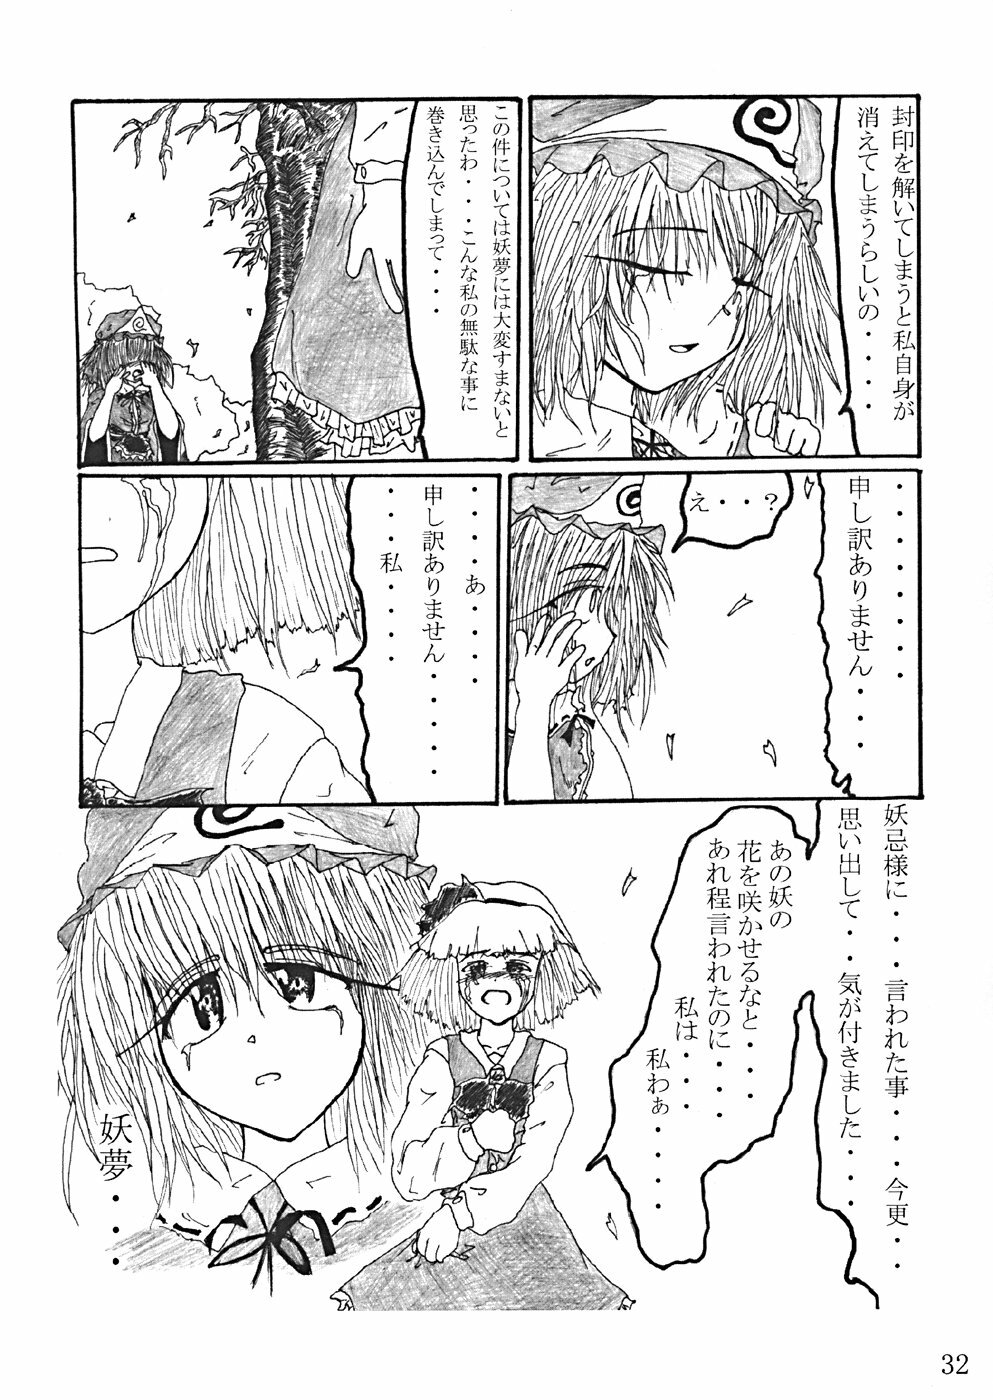 (CR35) [LemonMaiden (Various)] Oukasai ～ Cherry Point MAX (Touhou Project) page 35 full